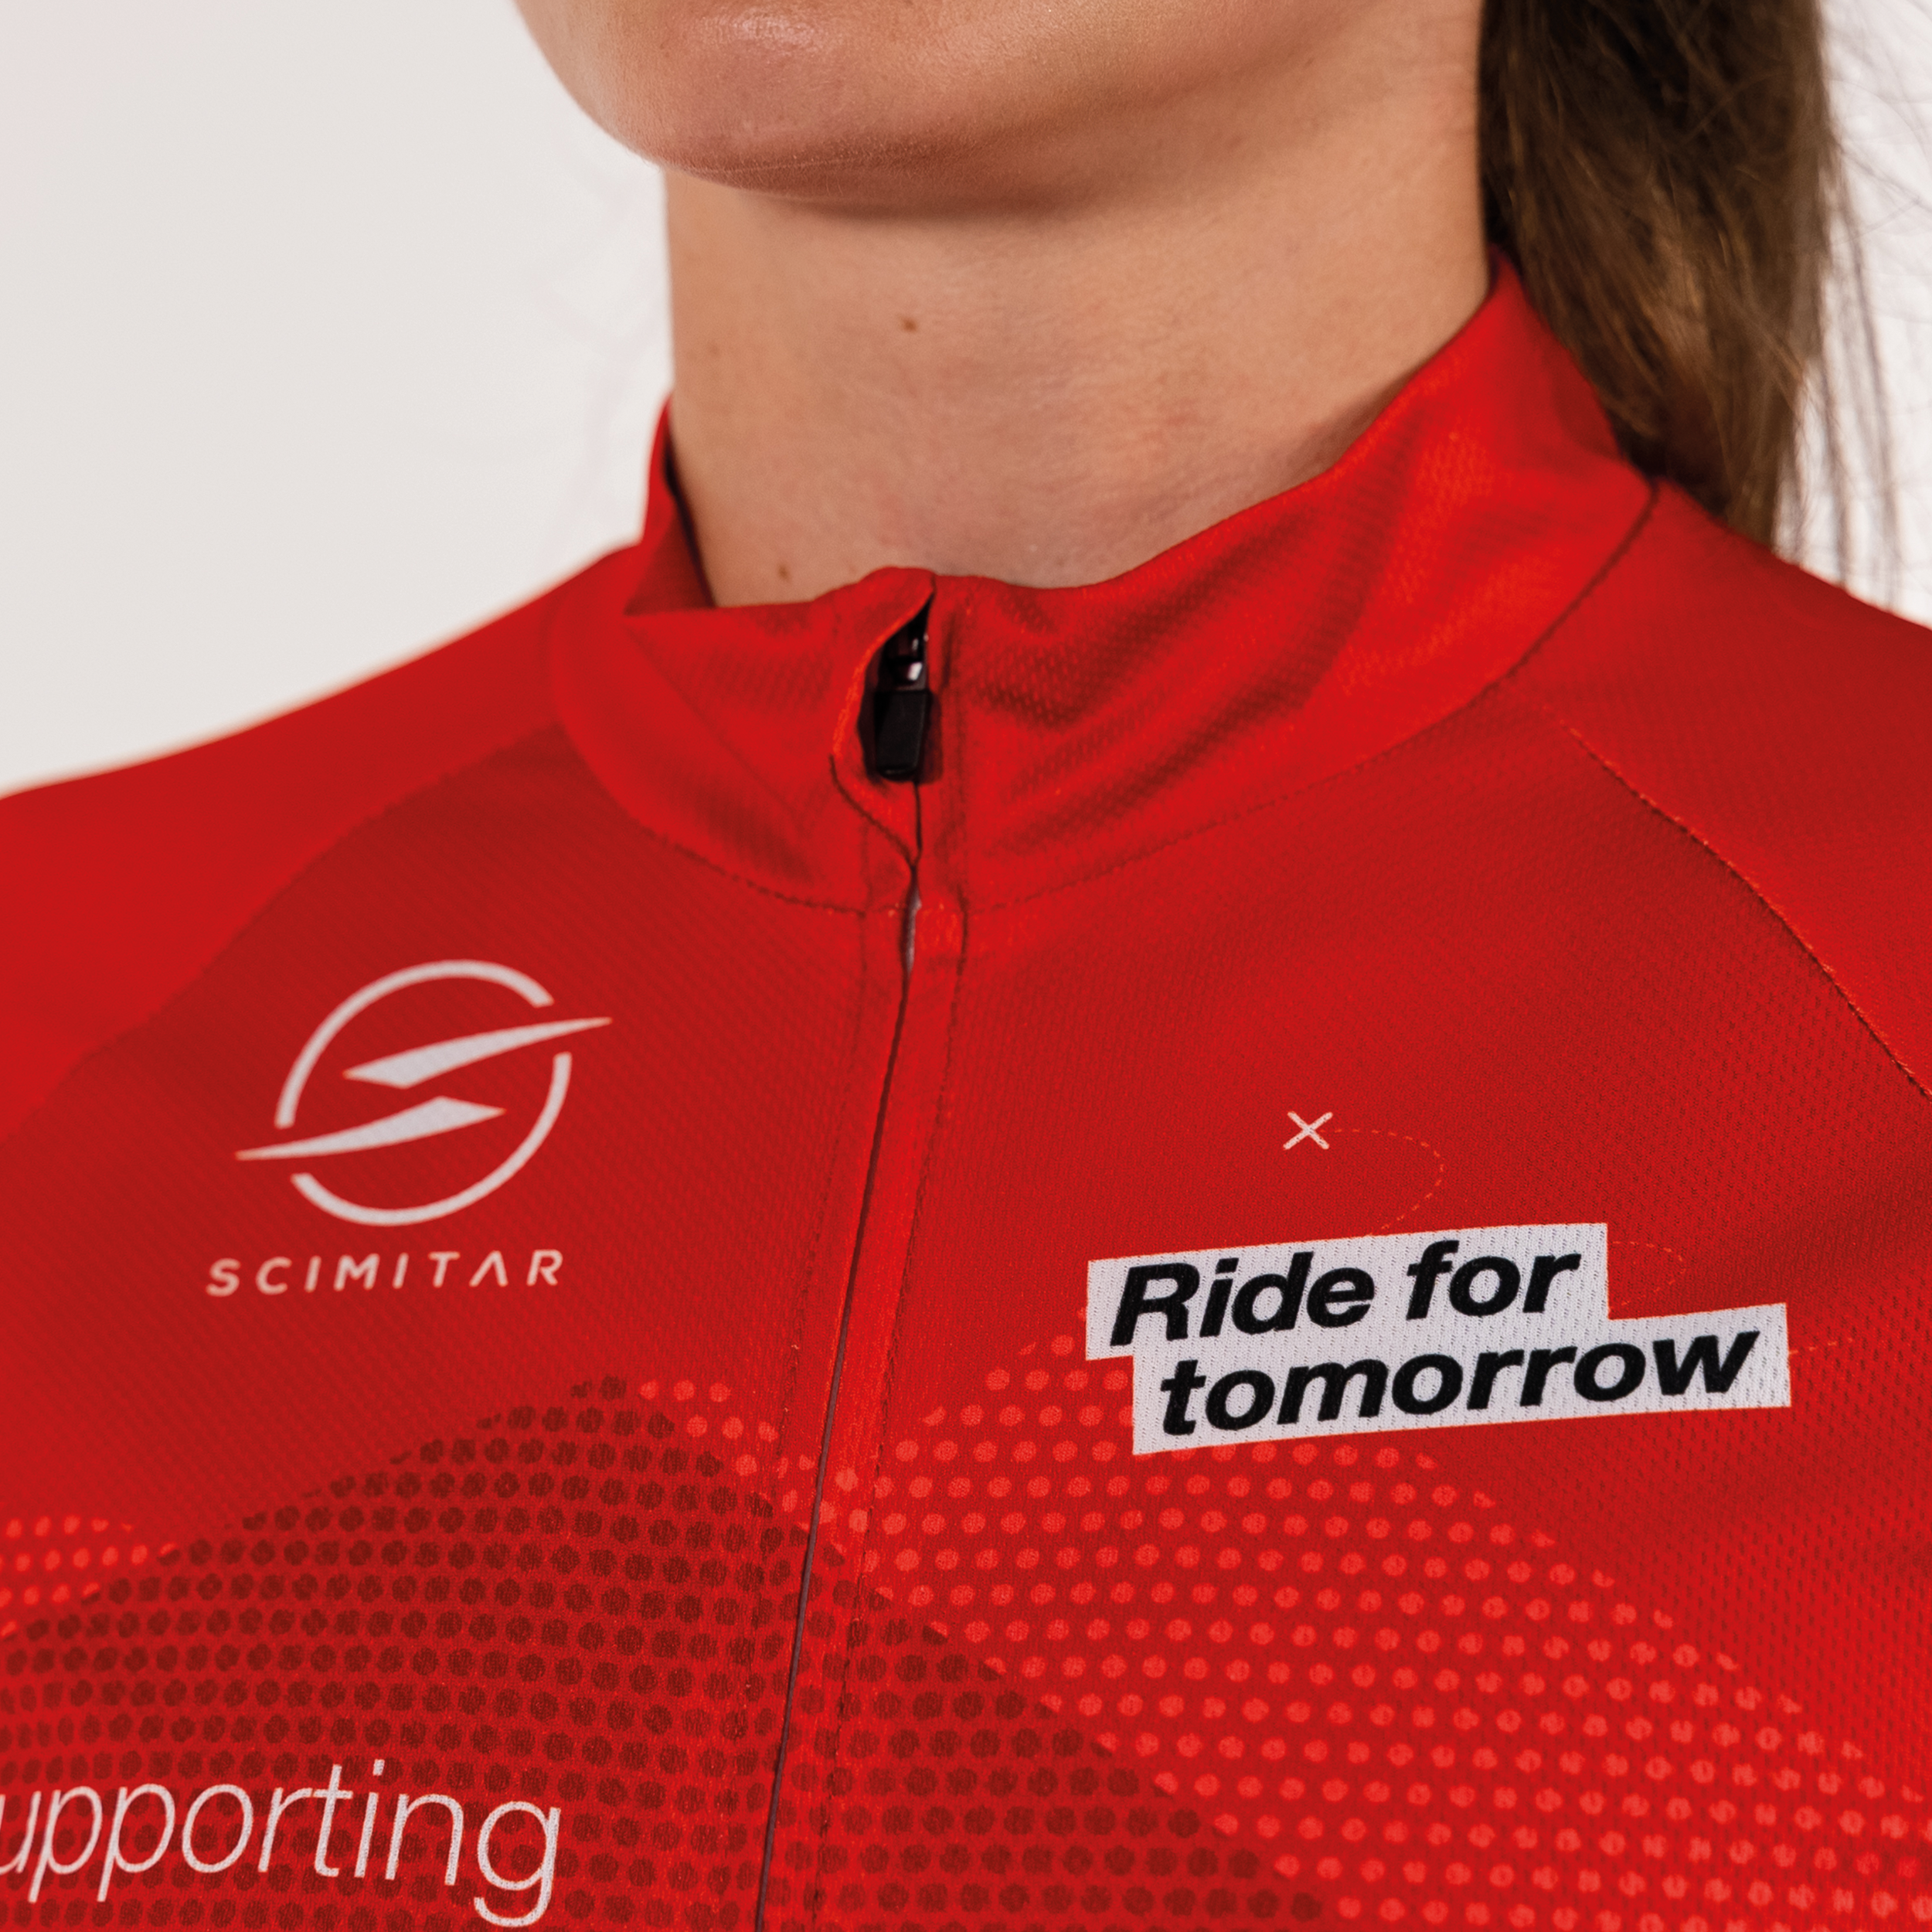 Ride for tomorrow recycled cycling jersey - women's fit